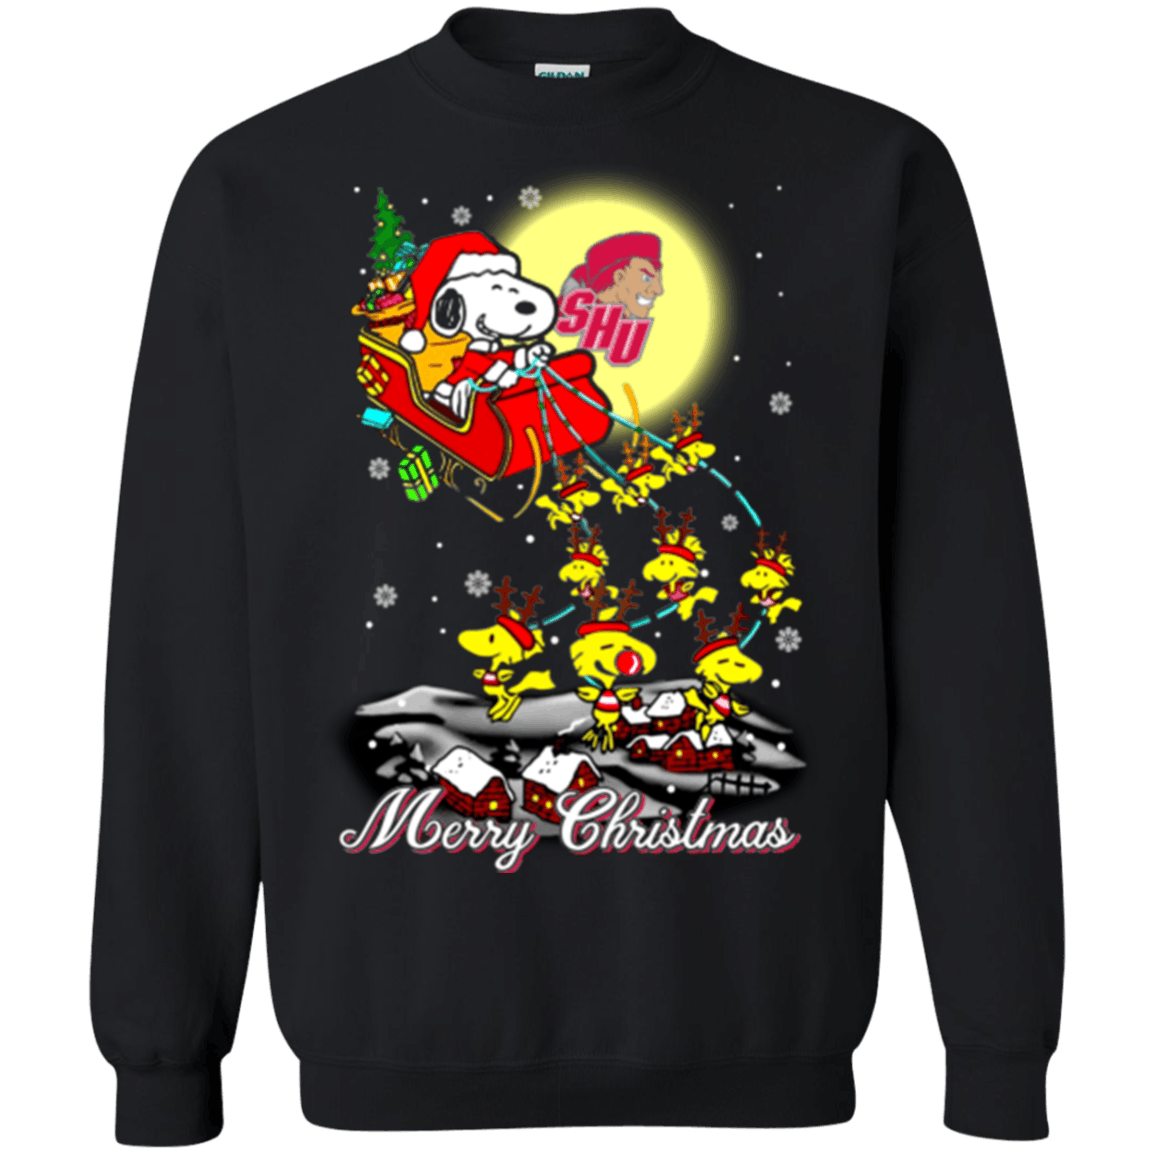 Amazing Shirt Sacred Heart Pioneers Ugly Christmas Sweater 2023S Santa Claus With Sleigh And Snoopy Sweatshirts